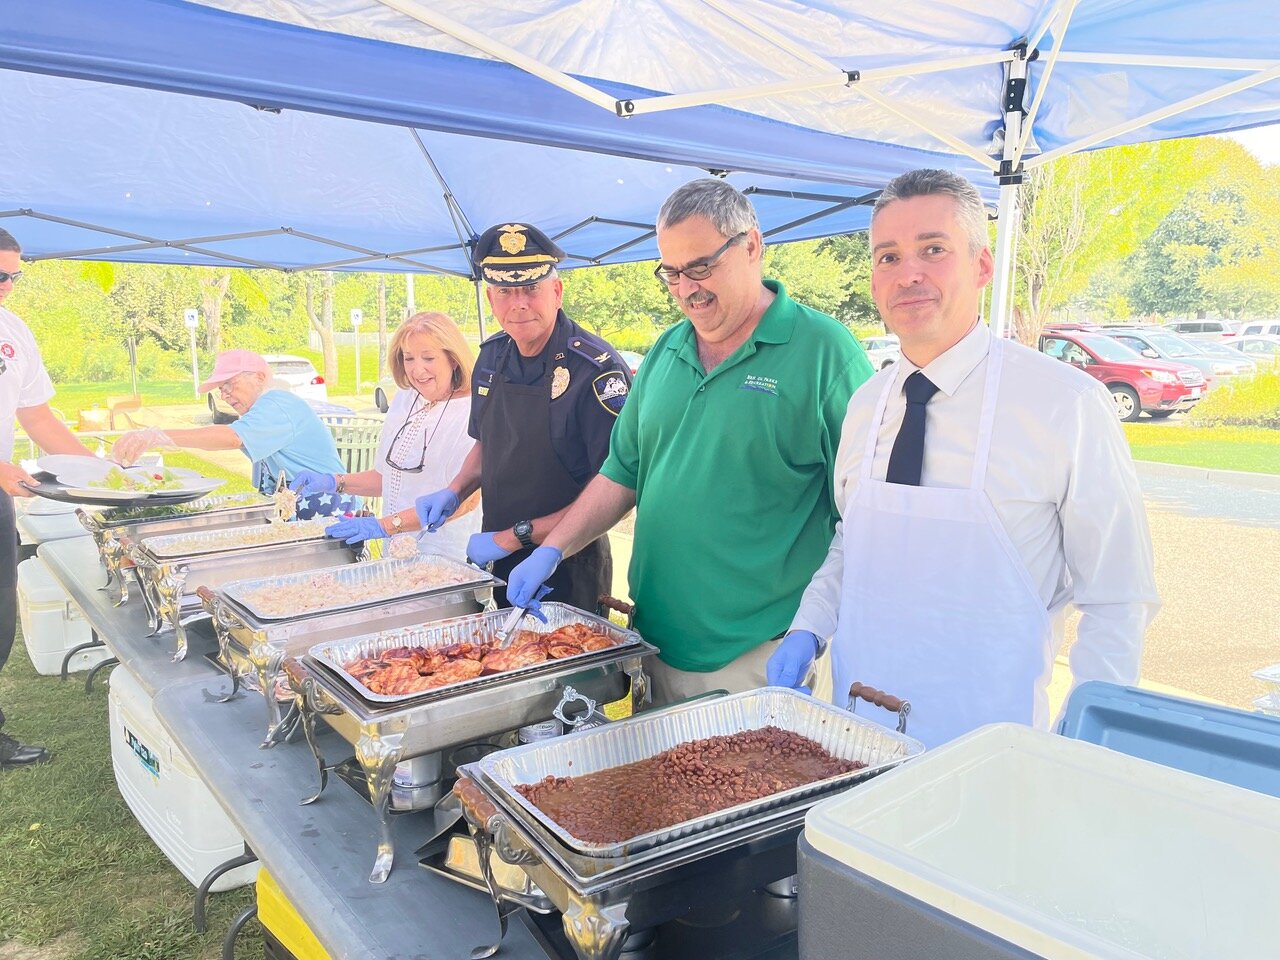 (R-l) Town Administrator Steve Contente, Parks and Recreation Director Warren Rensehausen, Police Chief Kevin Lynch, State Rep. Susan Donovan and Diane Davis kept the trays of food (a delicious barbecue chicken lunch donated by the Common Pub) coming.